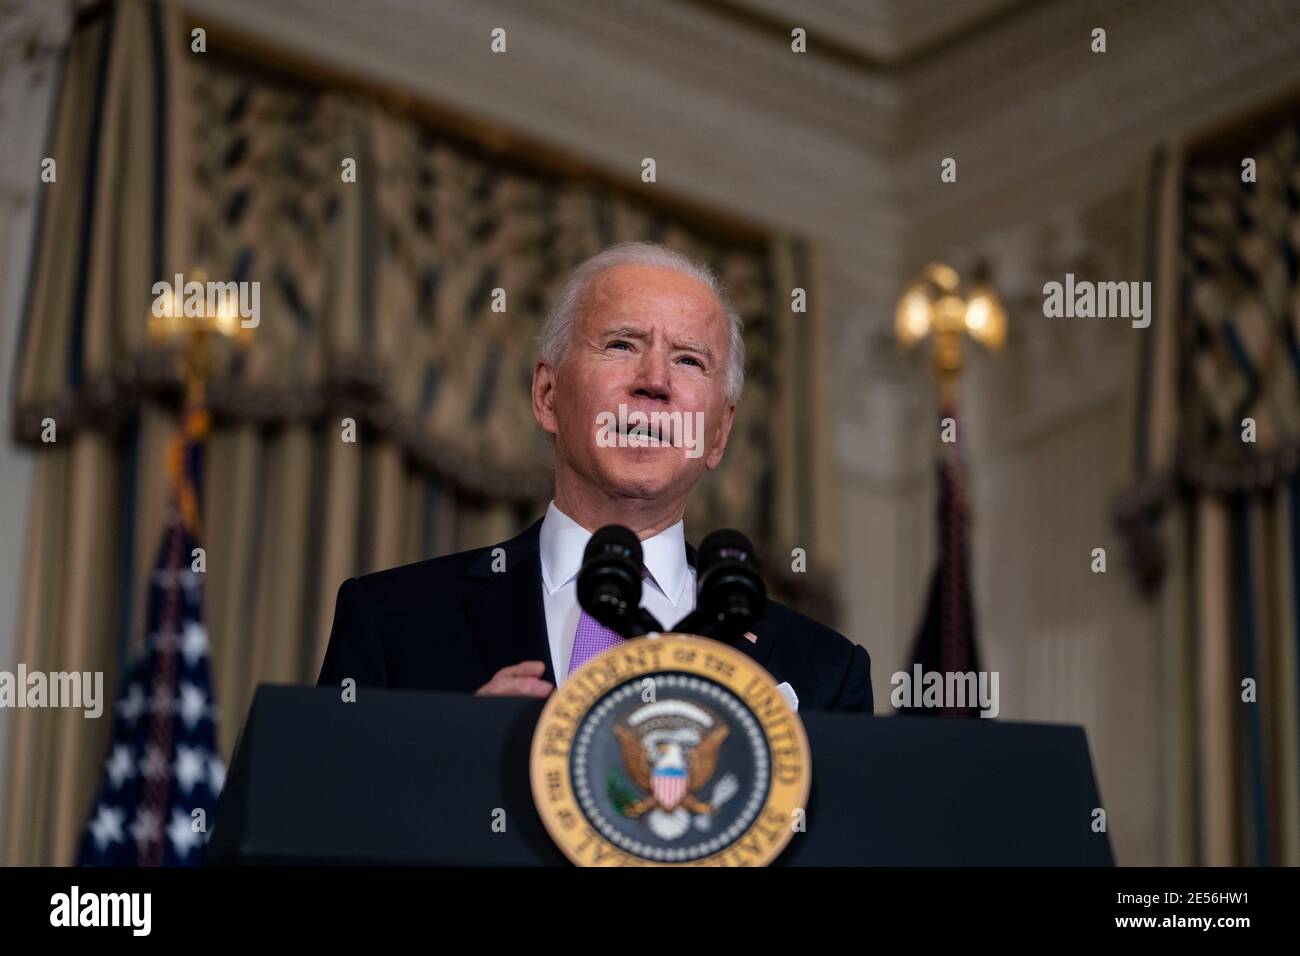 United States President Joe Biden delivers remarks outlining his racial equity agenda and signs executive actions in the State Dining Room of the White House, Tuesday, Jan. 26, 2021. Credit: Doug Mills/Pool via CNP /MediaPunch Stock Photo